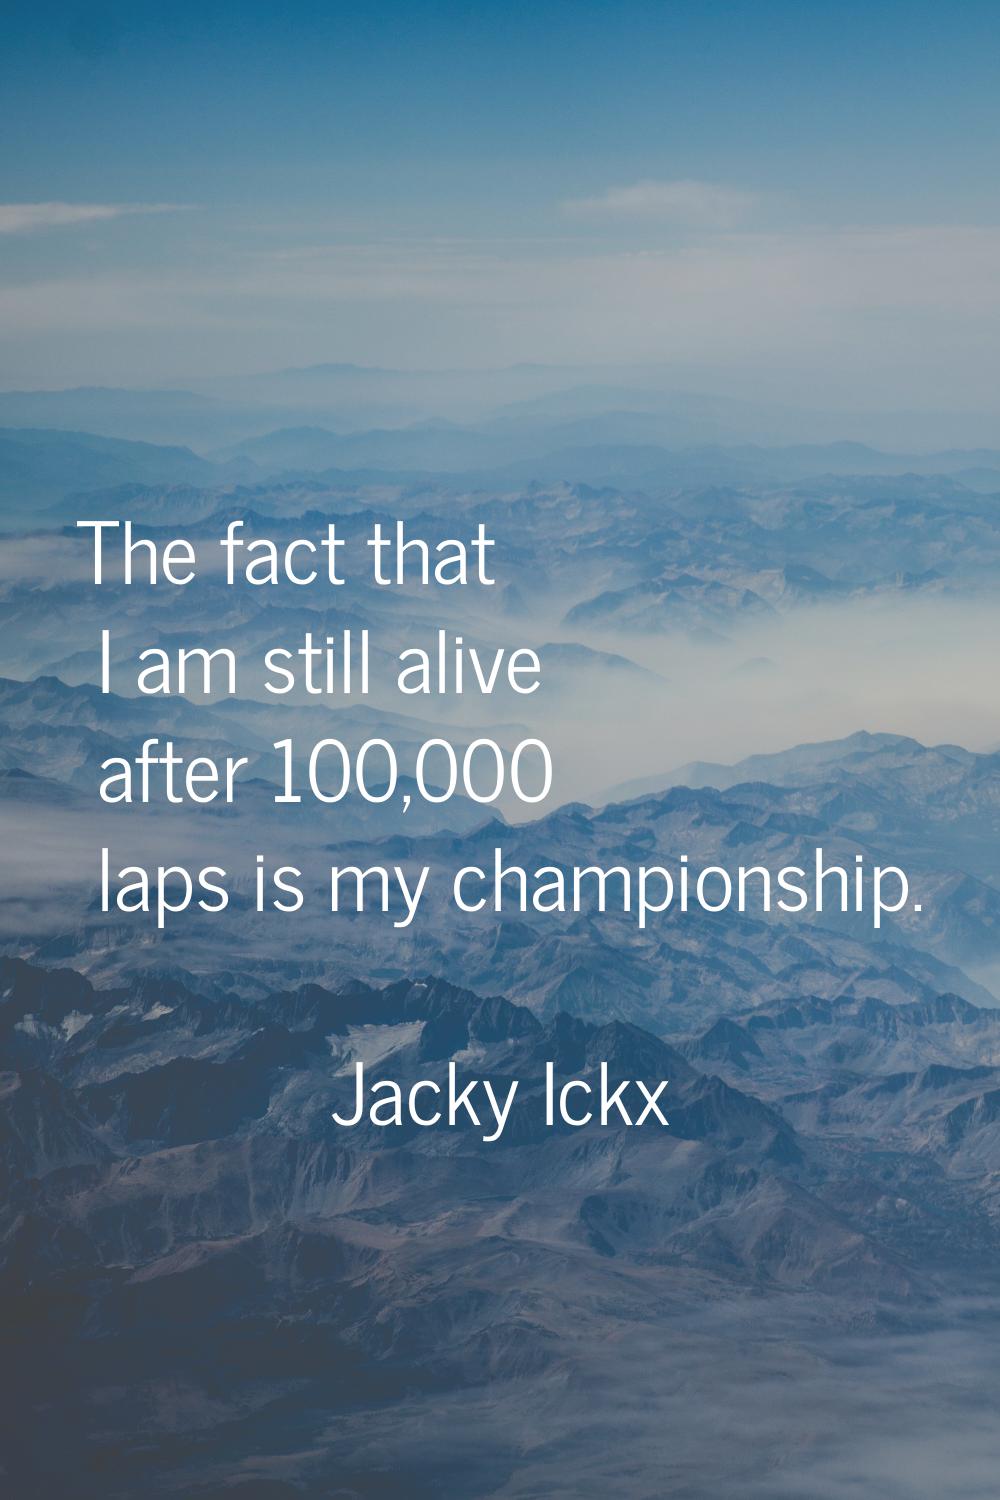 The fact that I am still alive after 100,000 laps is my championship.